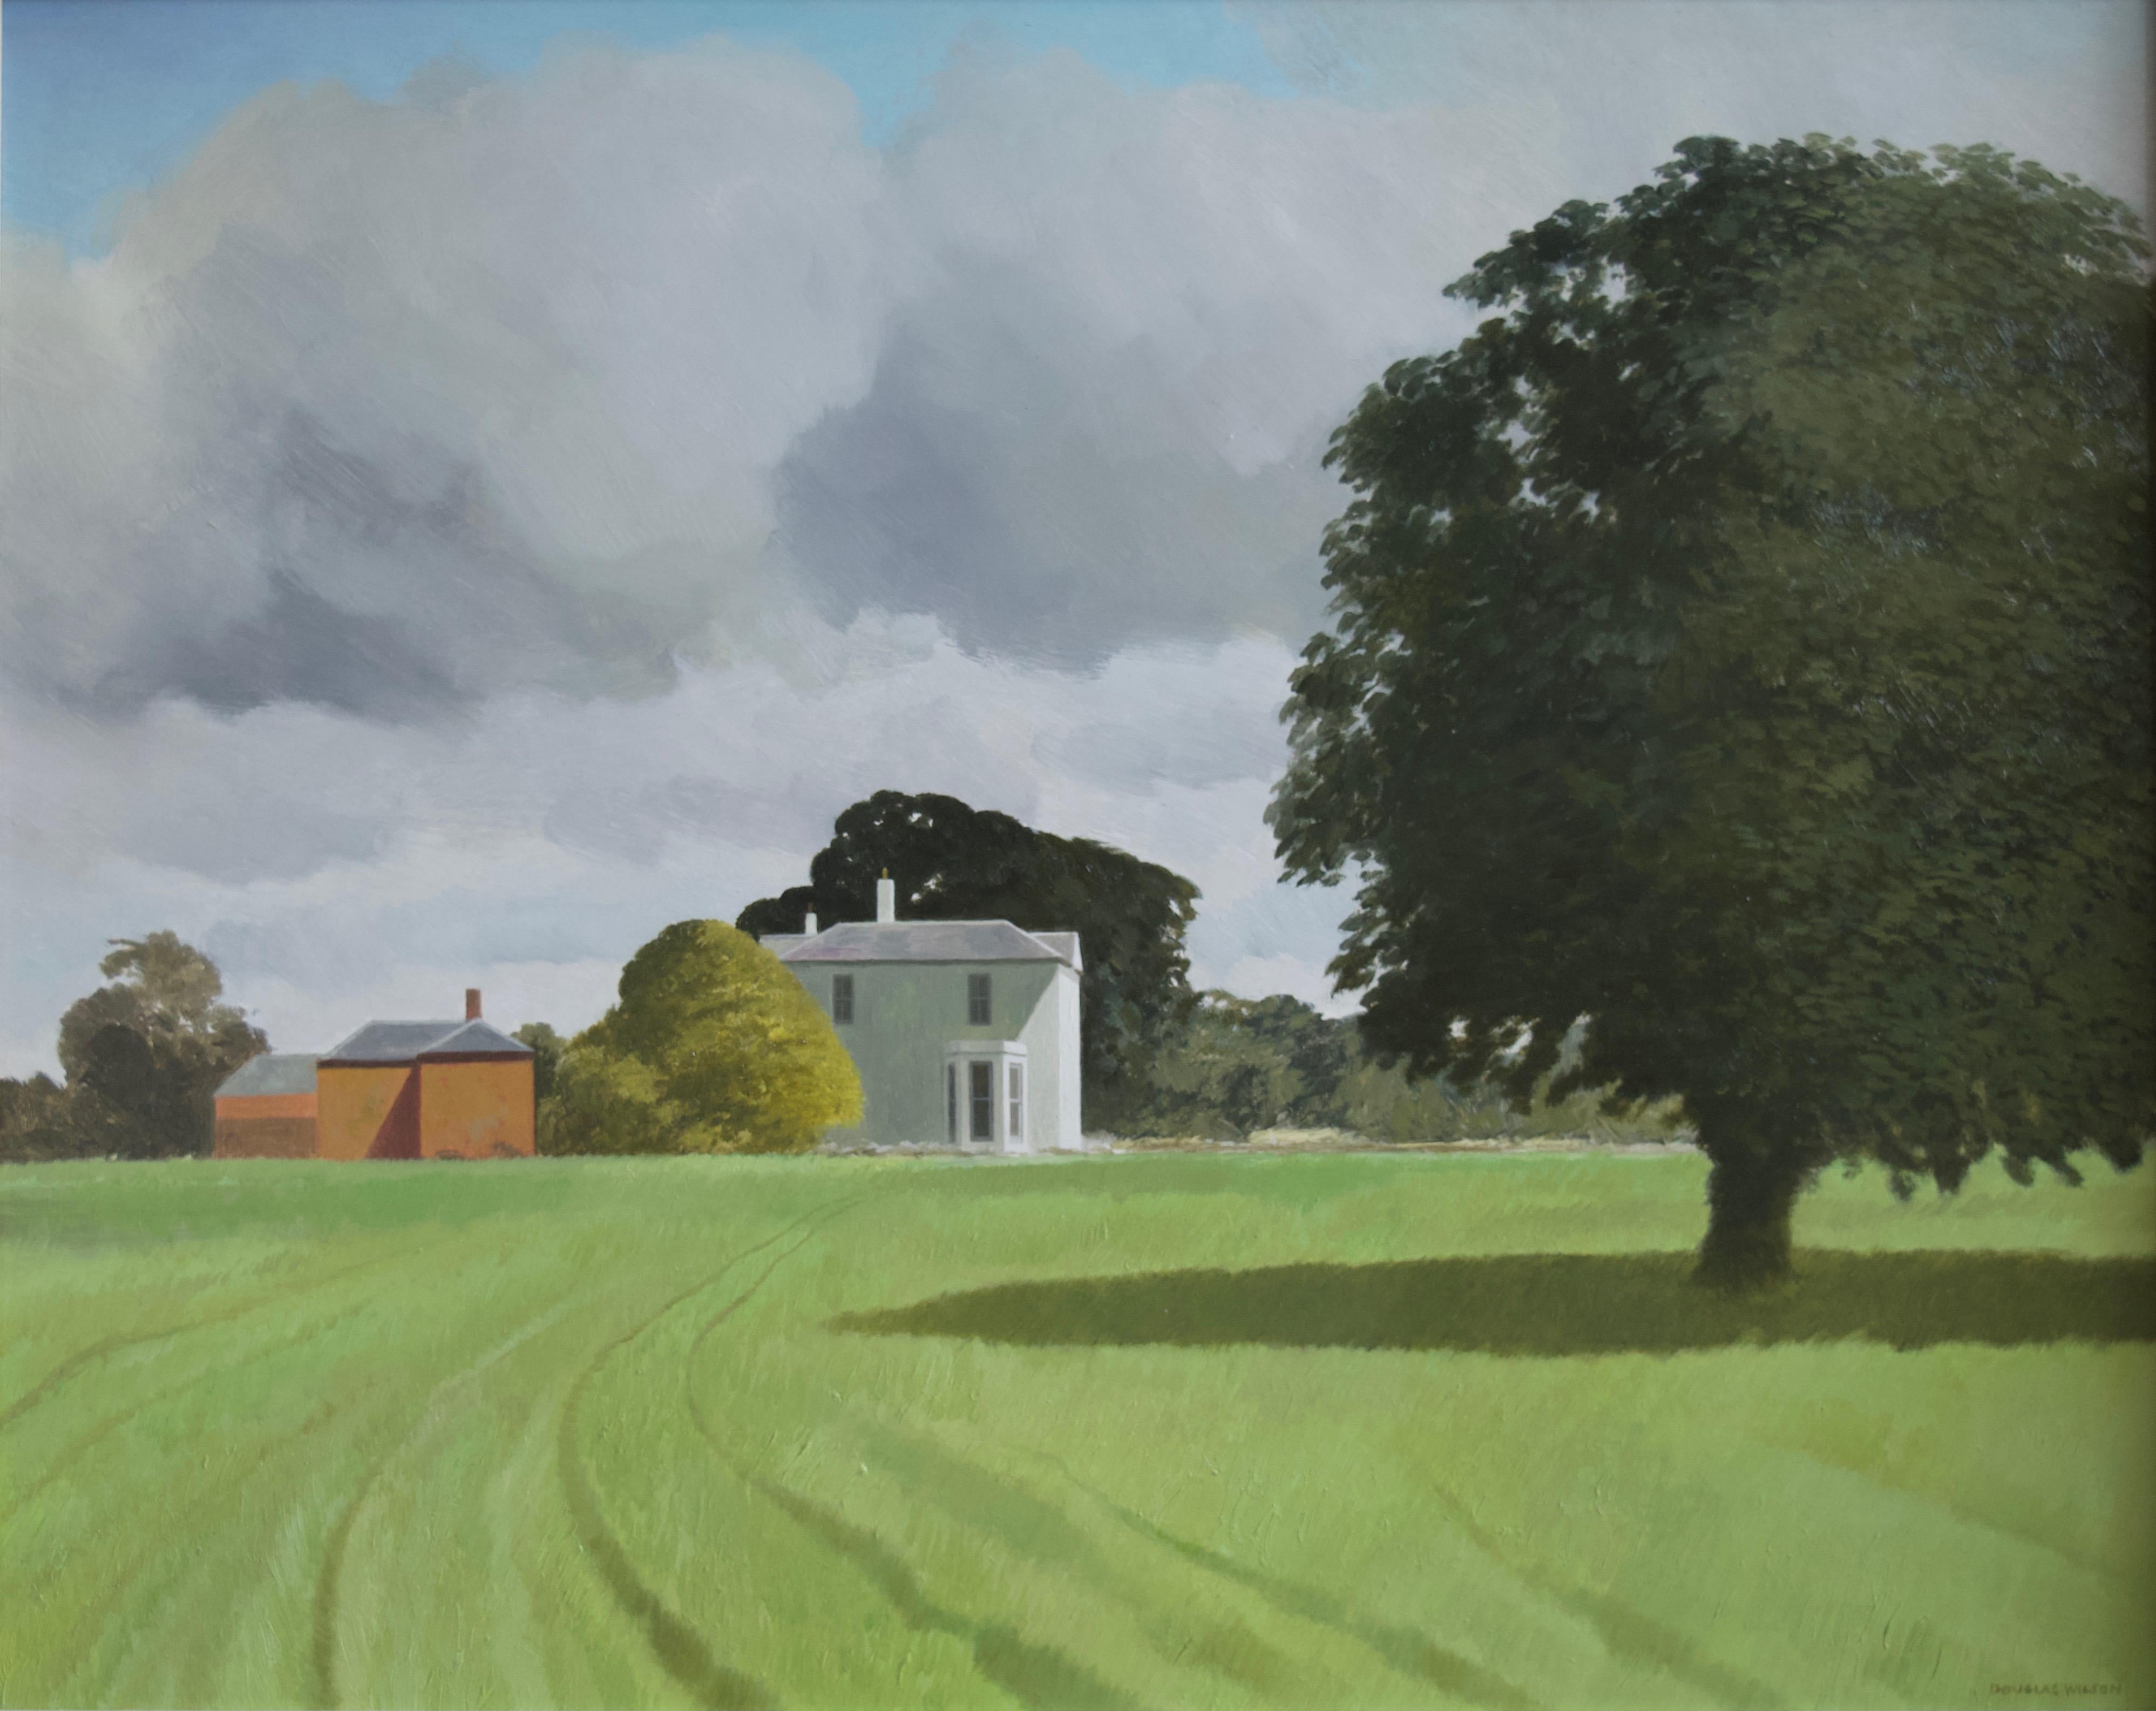 Douglas Wilson (born 1936)
Young corn
Signed, inscribed with title on old label to reverse
Oil on board
16 x 20 inches
20½ x 24 inches with frame

An instantly appealing image of an English country house viewed across a sweep of young corn with the